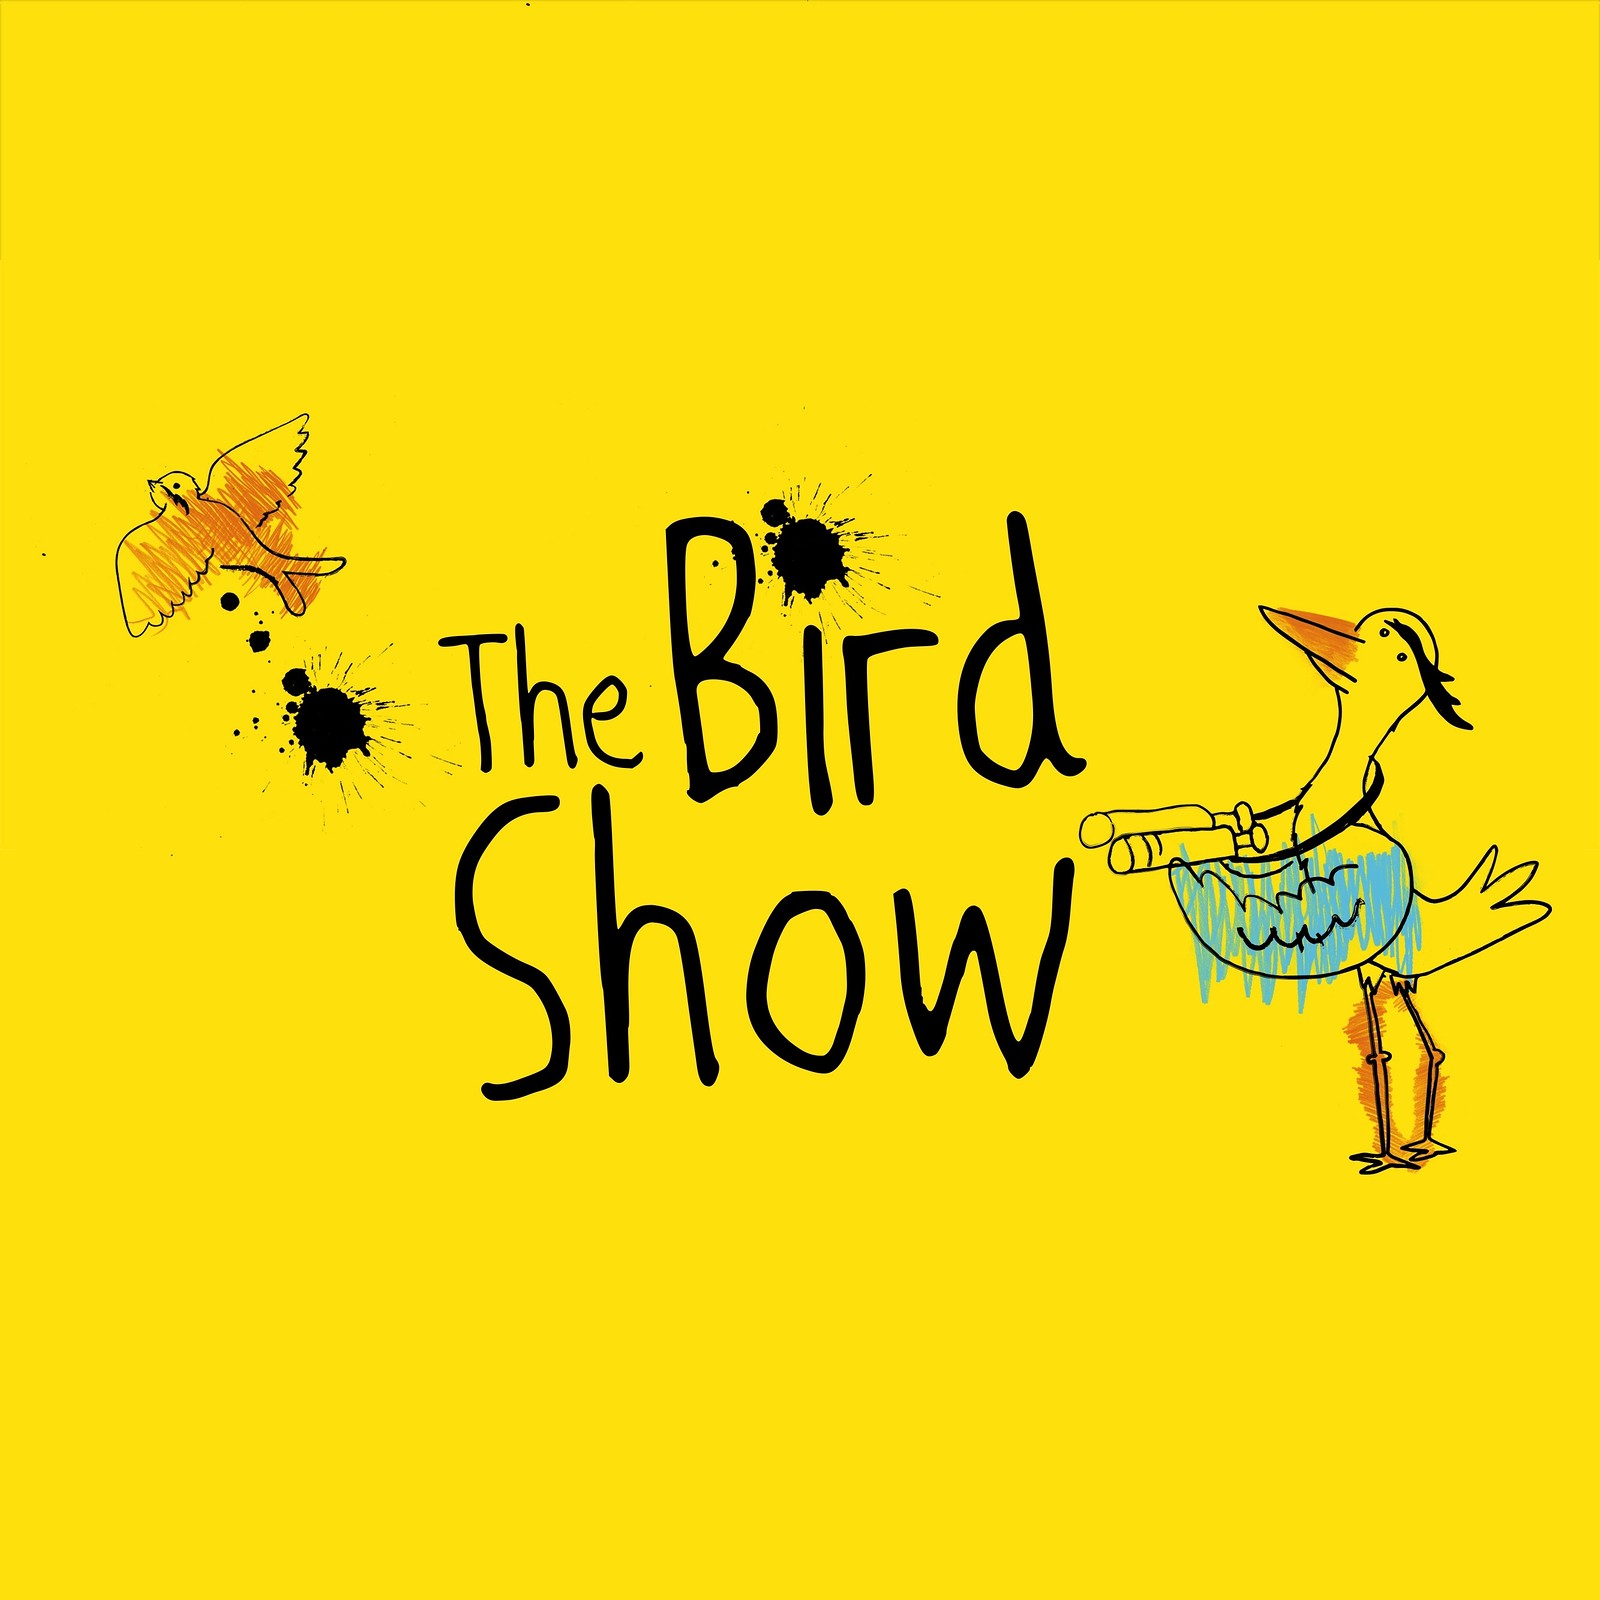 The Bird Show  - A flap-tastic family comedy at The Wardrobe Theatre